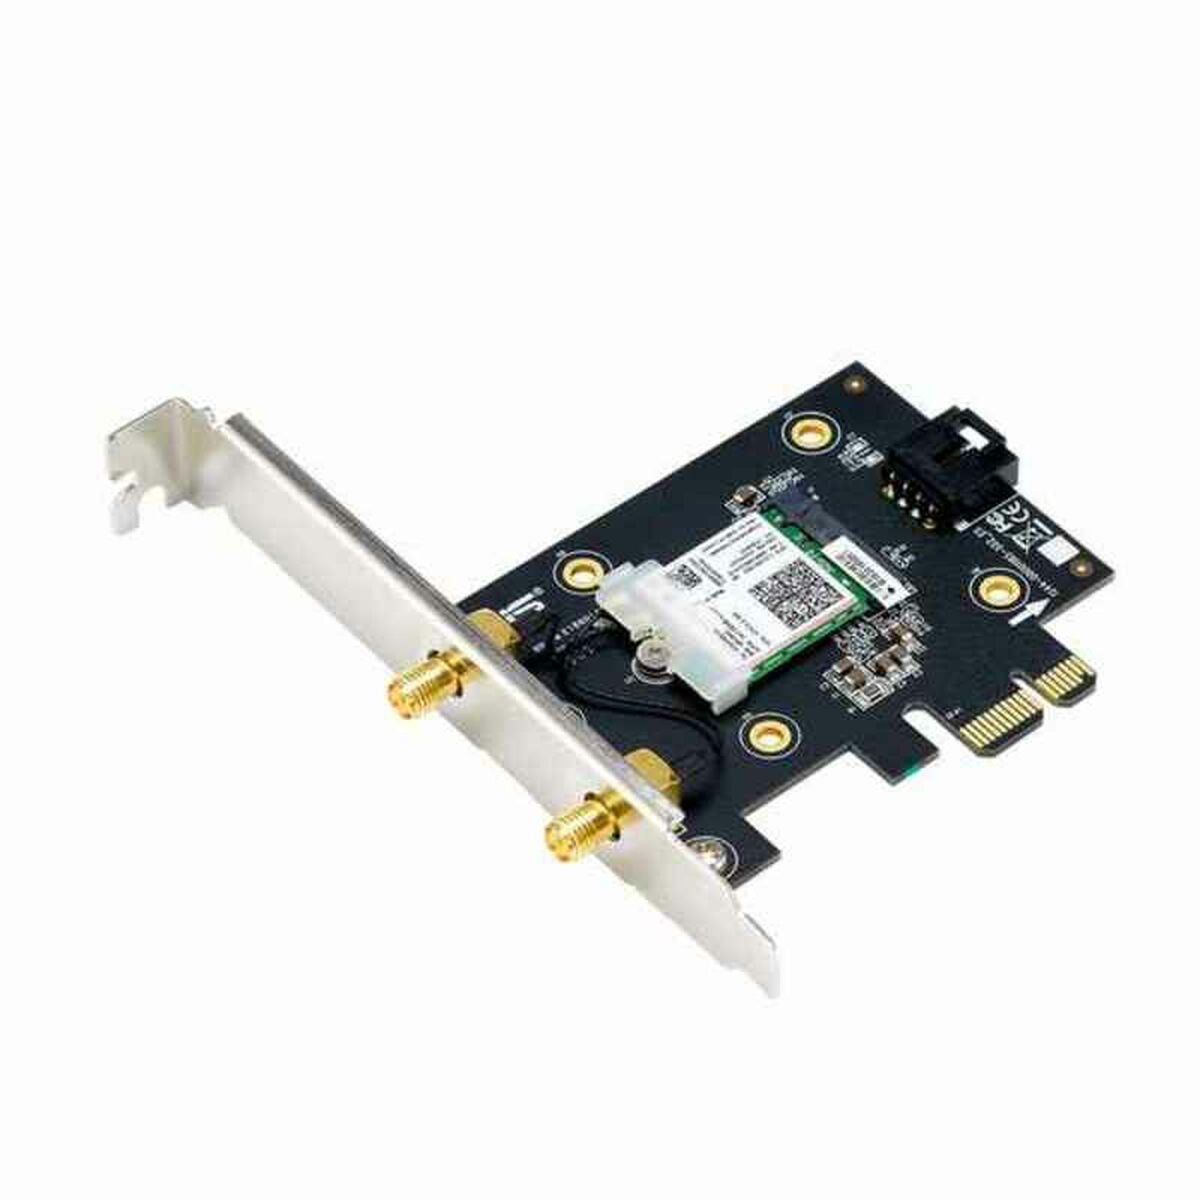 Wi-Fi Network Card Asus AX3000 3000 Mbps, Asus, Computing, Components, wi-fi-network-card-asus-ax3000-3000-mbps, Brand_Asus, category-reference-2609, category-reference-2803, category-reference-2811, category-reference-t-19685, category-reference-t-19912, category-reference-t-21360, computers / components, Condition_NEW, Price_50 - 100, Teleworking, RiotNook